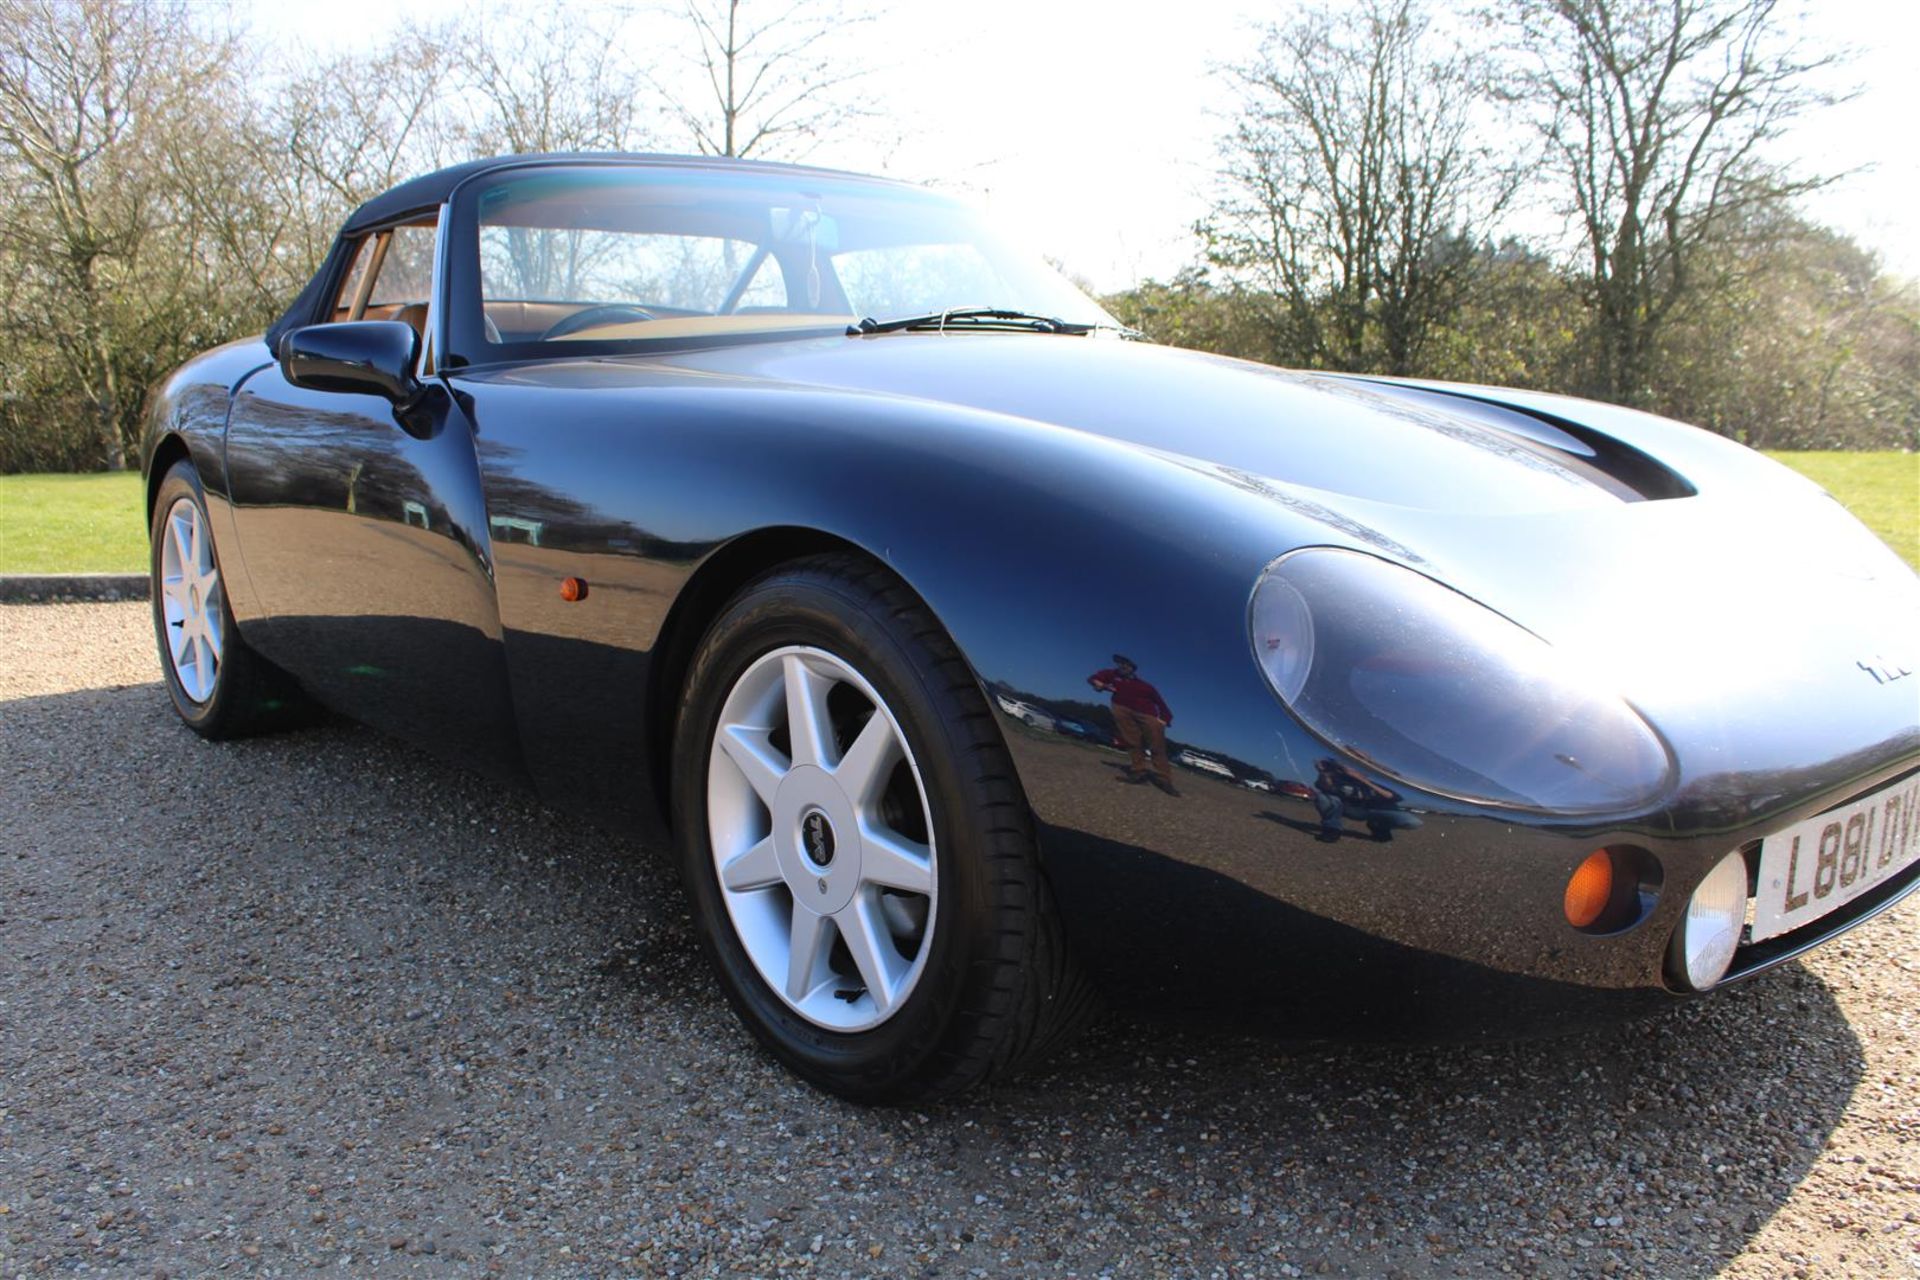 1993 TVR Griffith 500 - Image 8 of 19